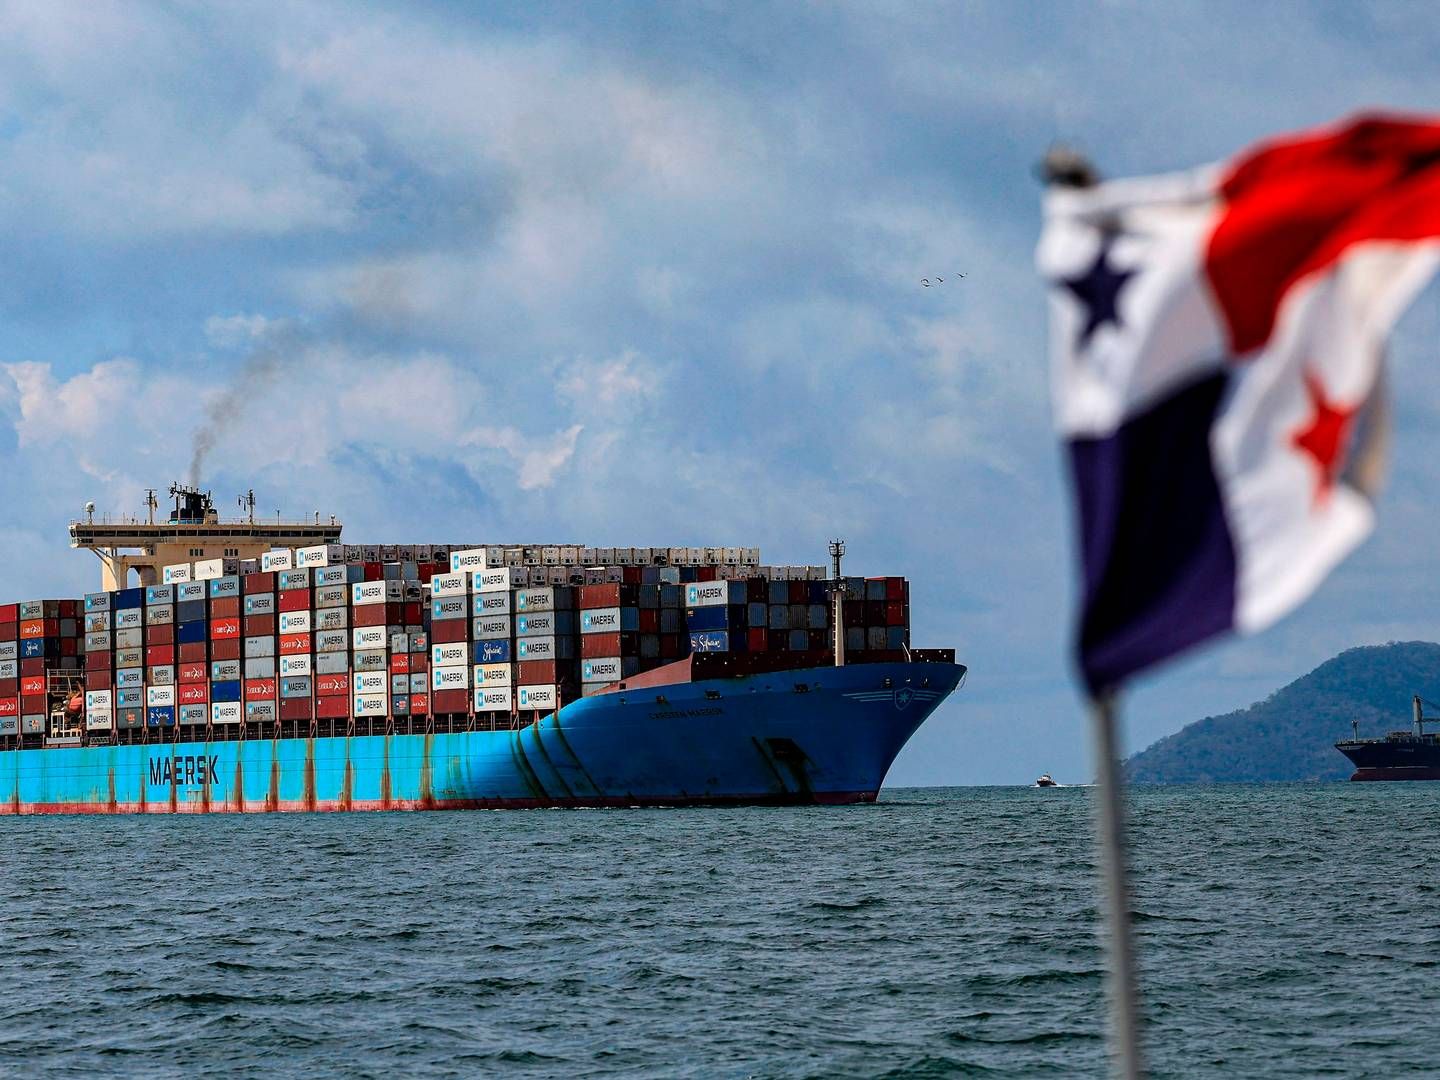 24 ships are scheduled to sail through the canal daily between May 7 and 15. After that, the number will be increased to 31 on May 16. | Photo: Martin Bernetti/AFP/Ritzau Scanpix